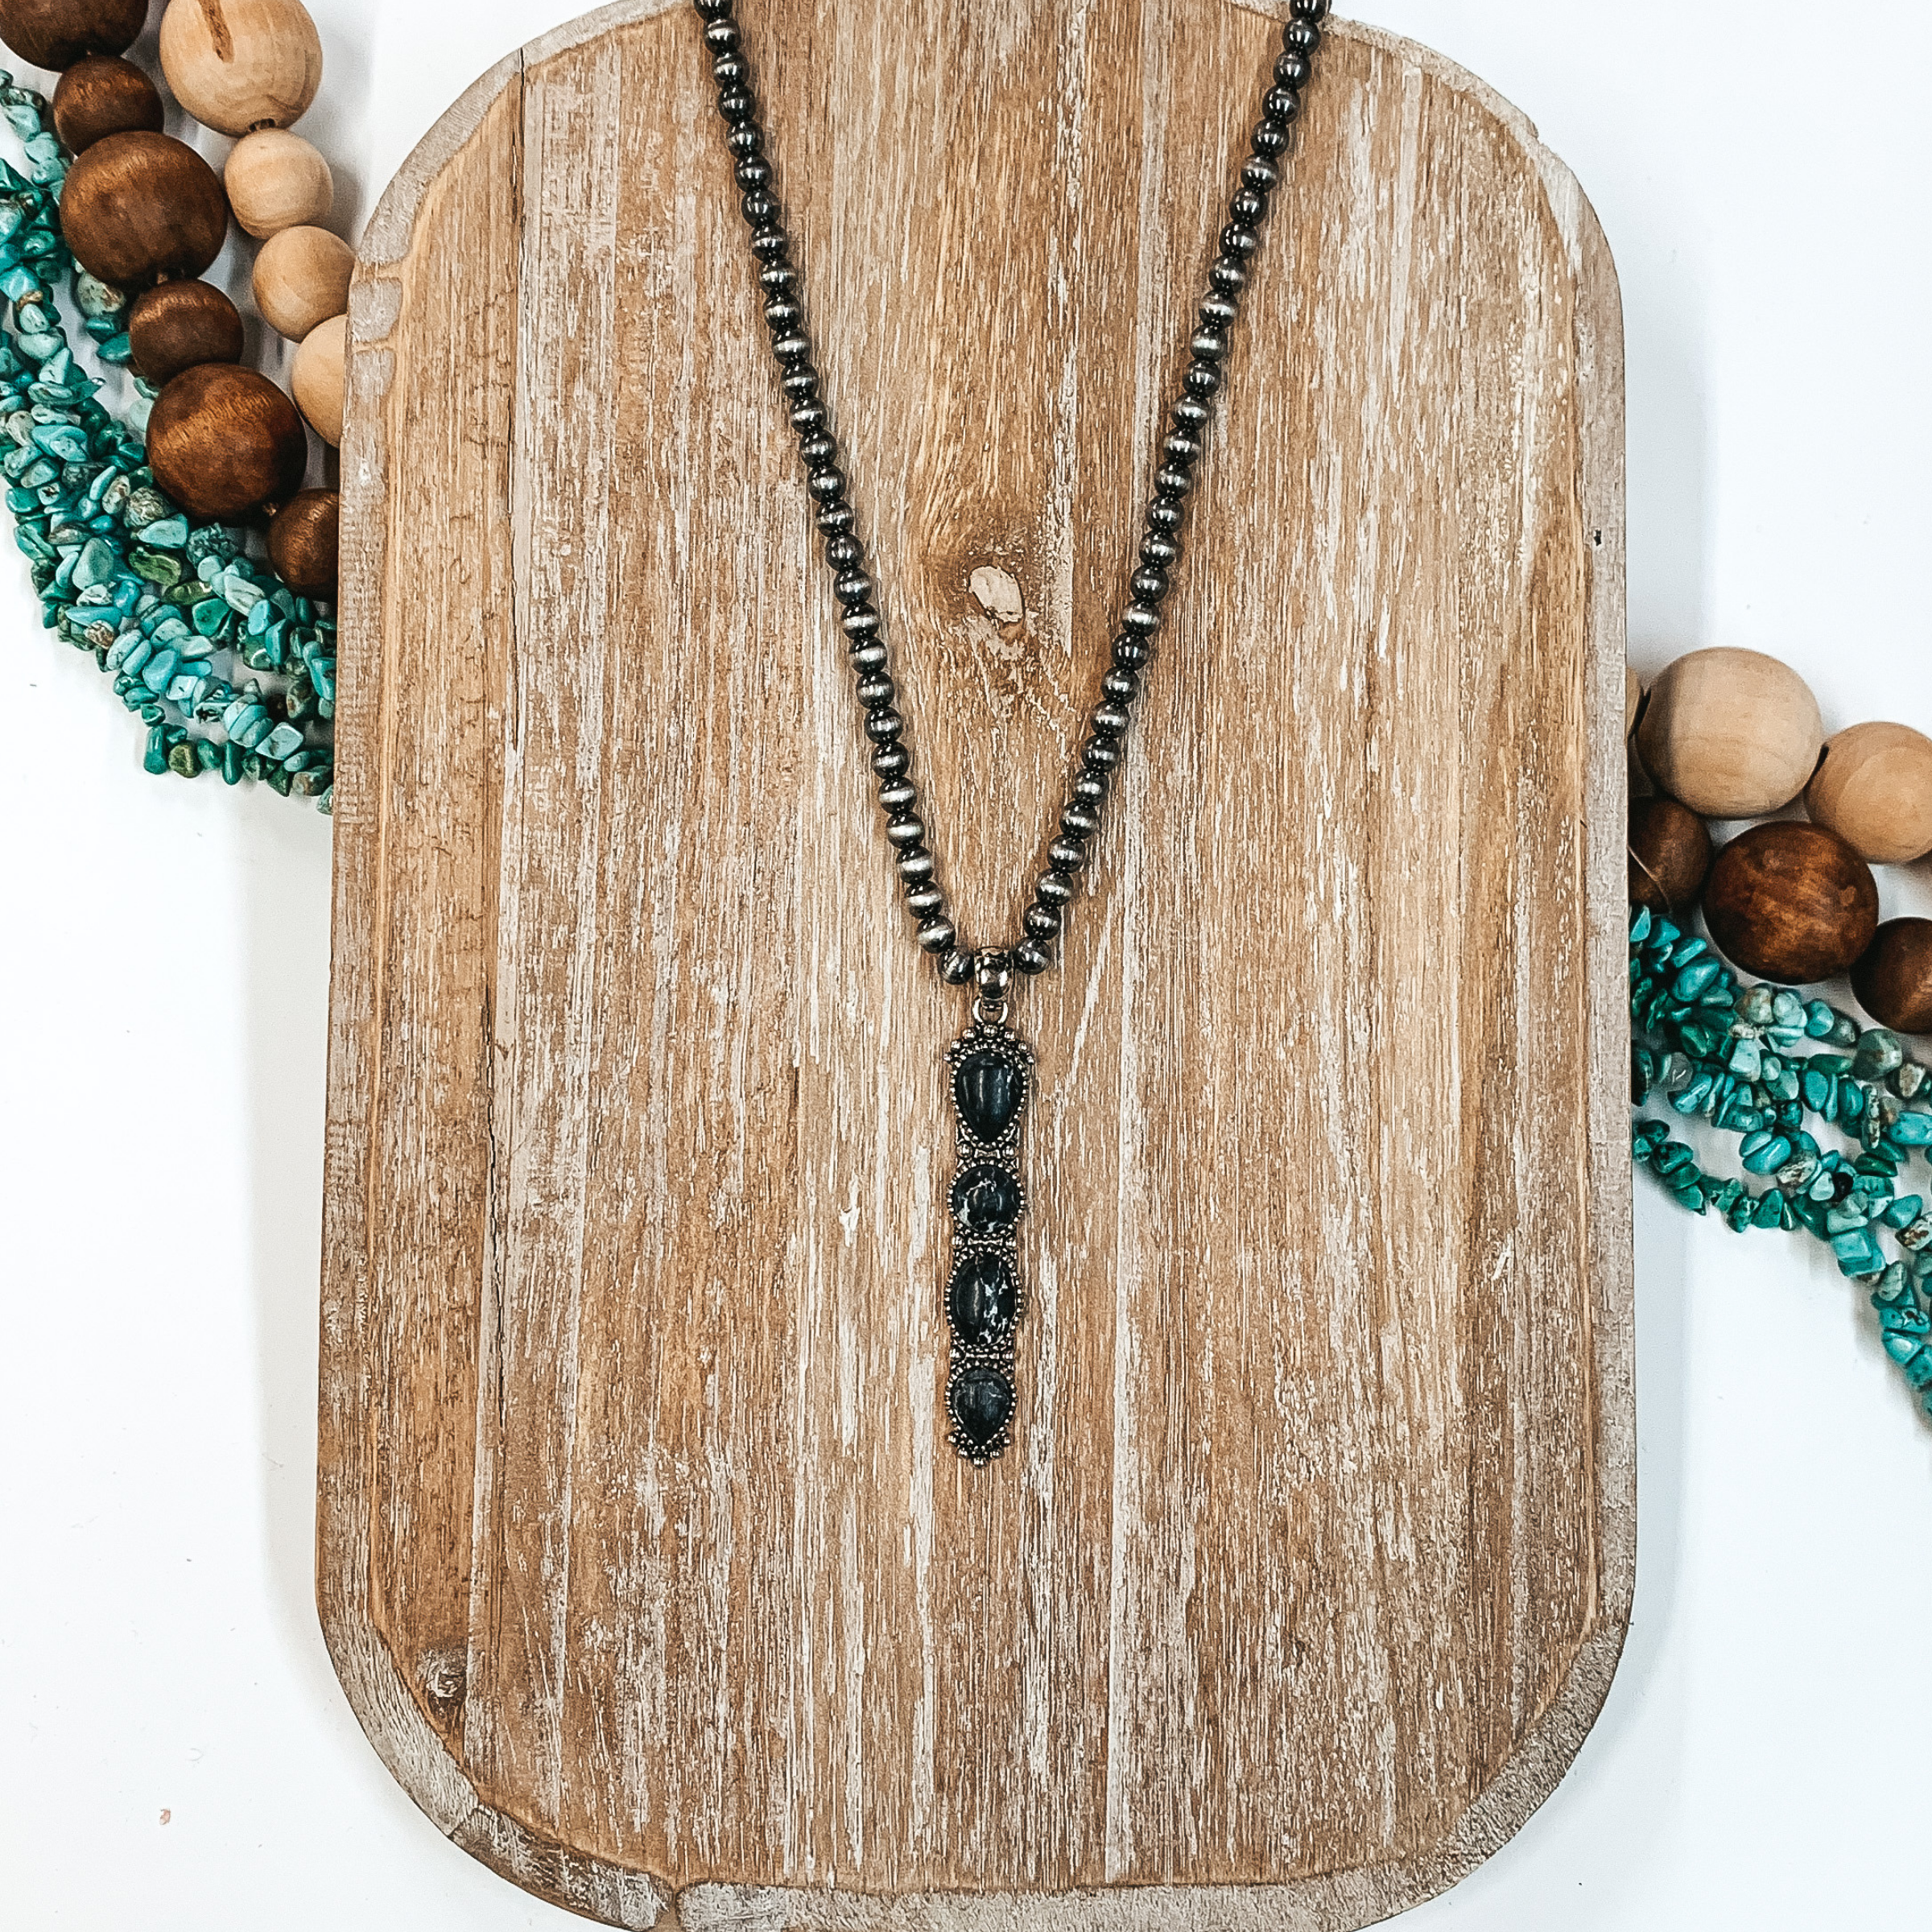 Lariat Inspired Pendant Necklace in Black - Giddy Up Glamour Boutique